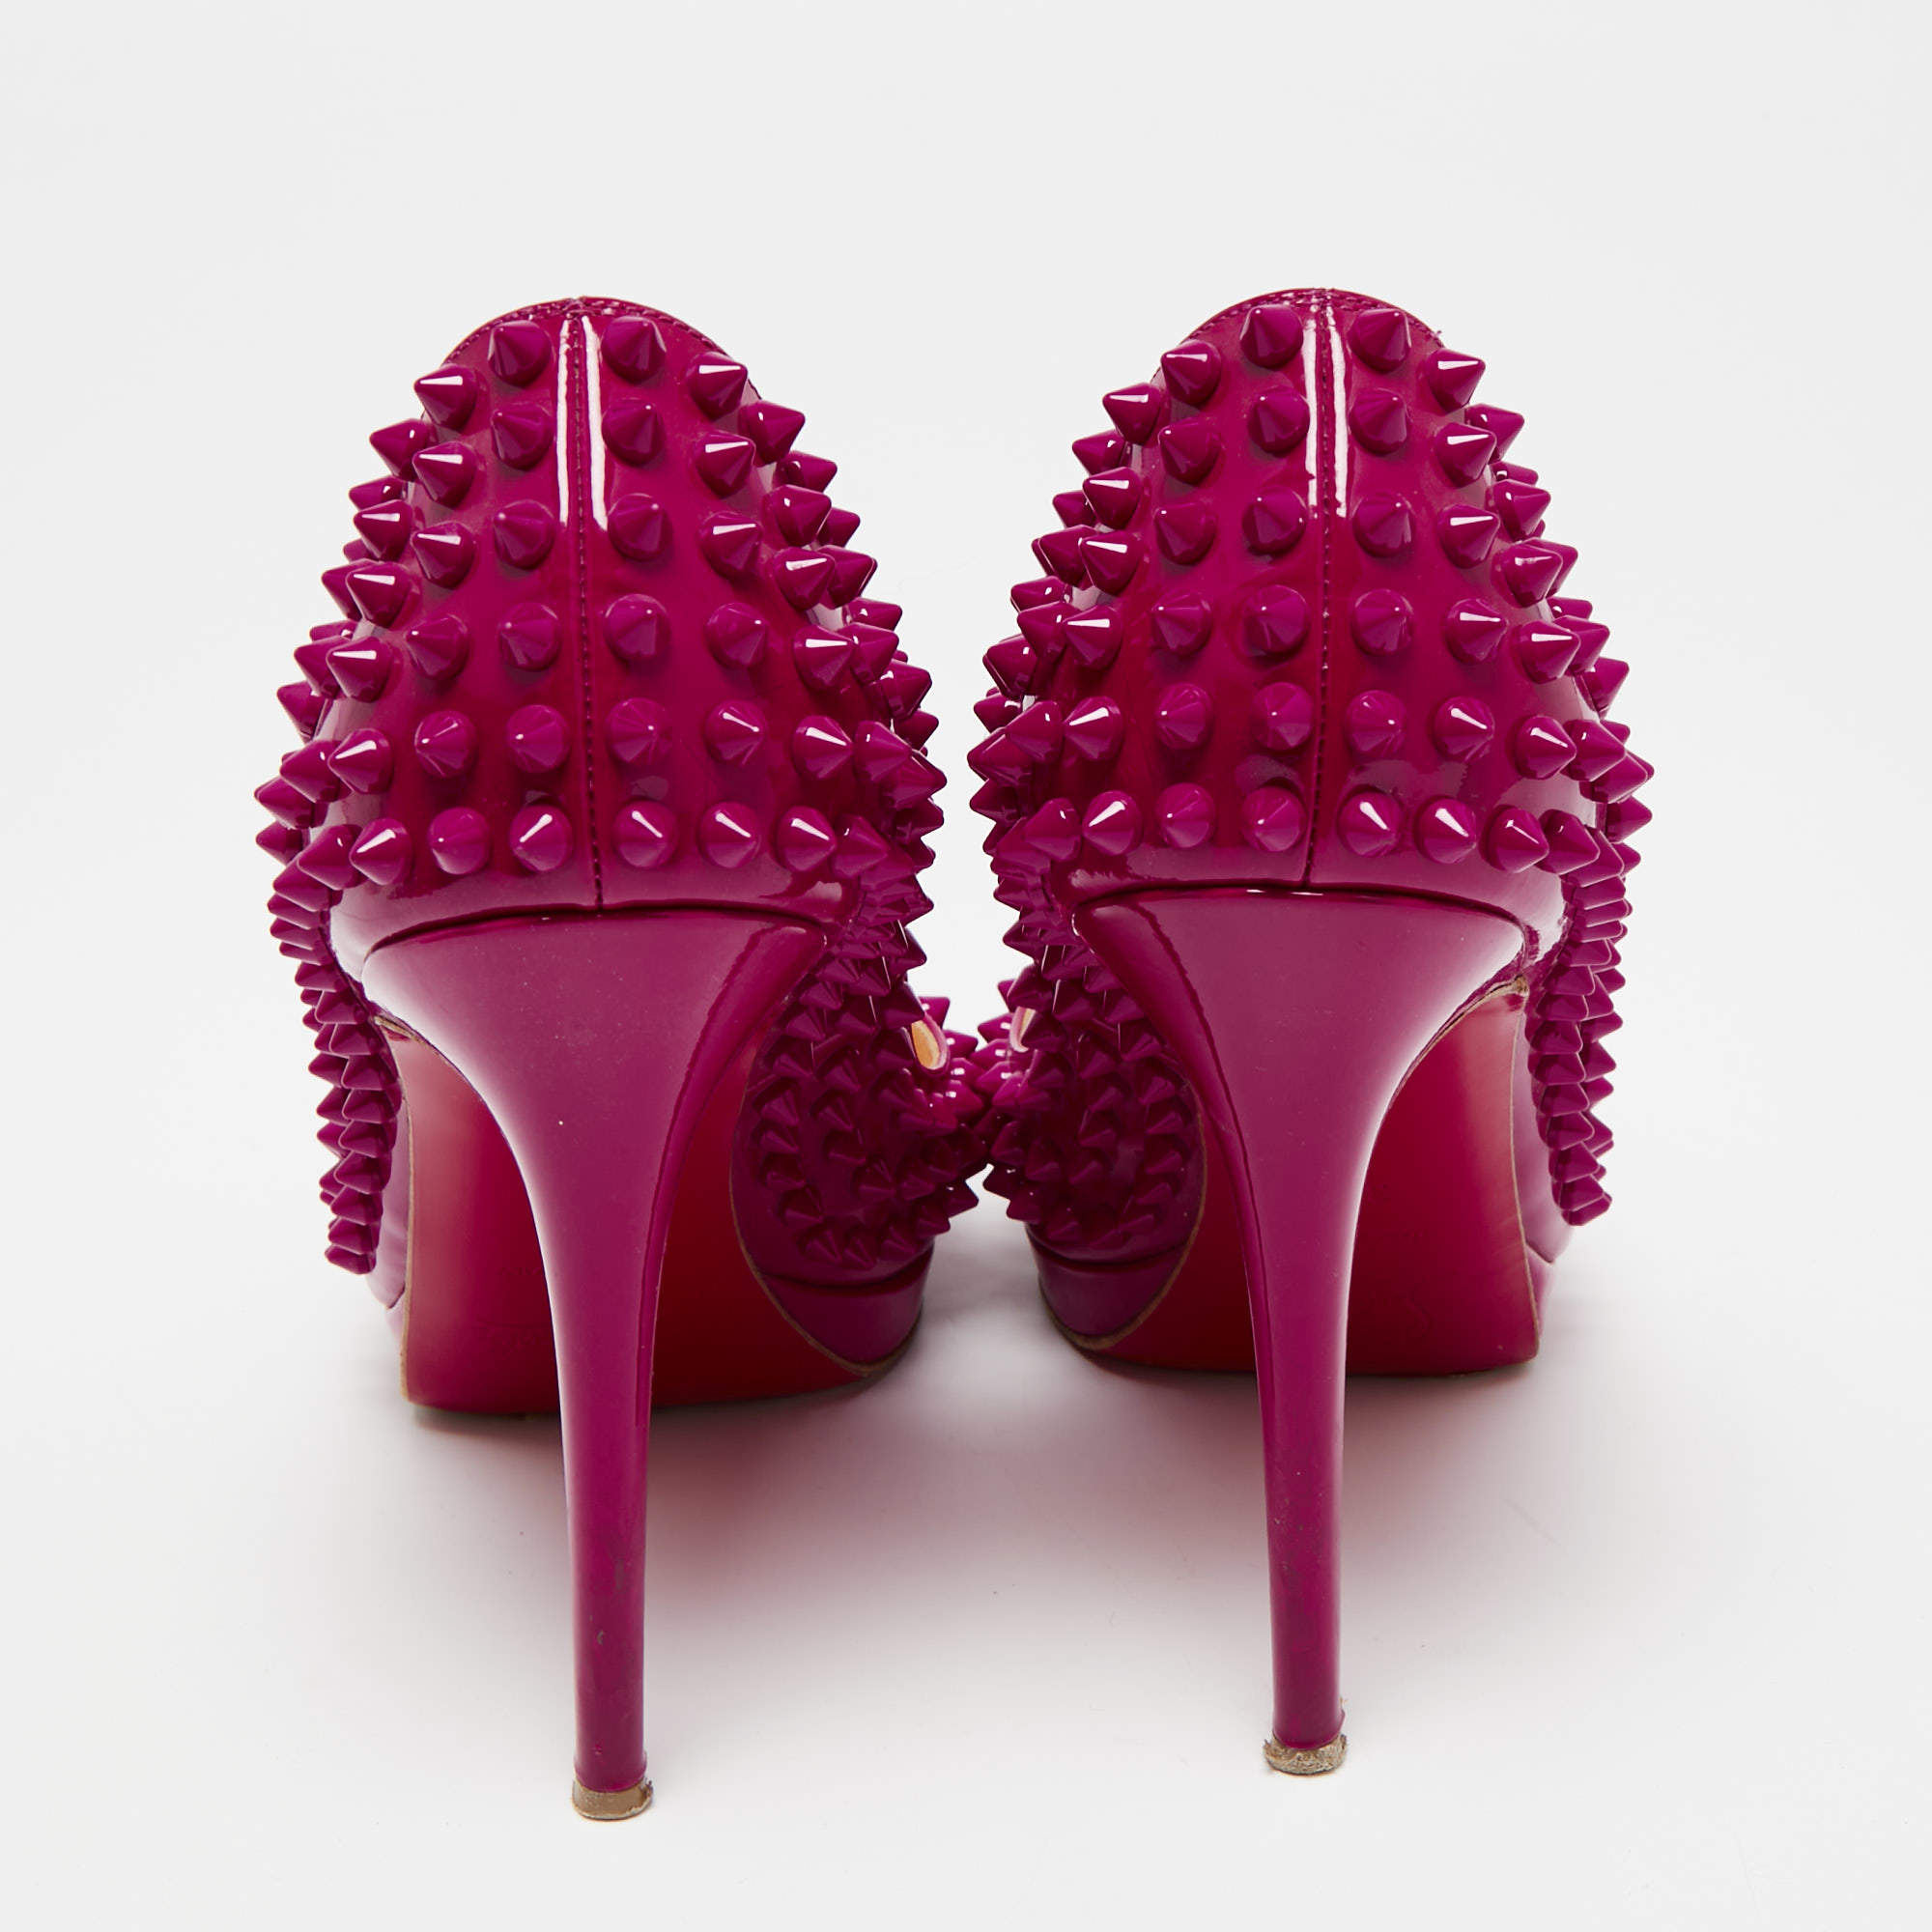 Christian Louboutin Pink/Bronze Suede and Leather Studded Cap-Toe Geo Pumps  Size 39.5 Christian Louboutin | TLC